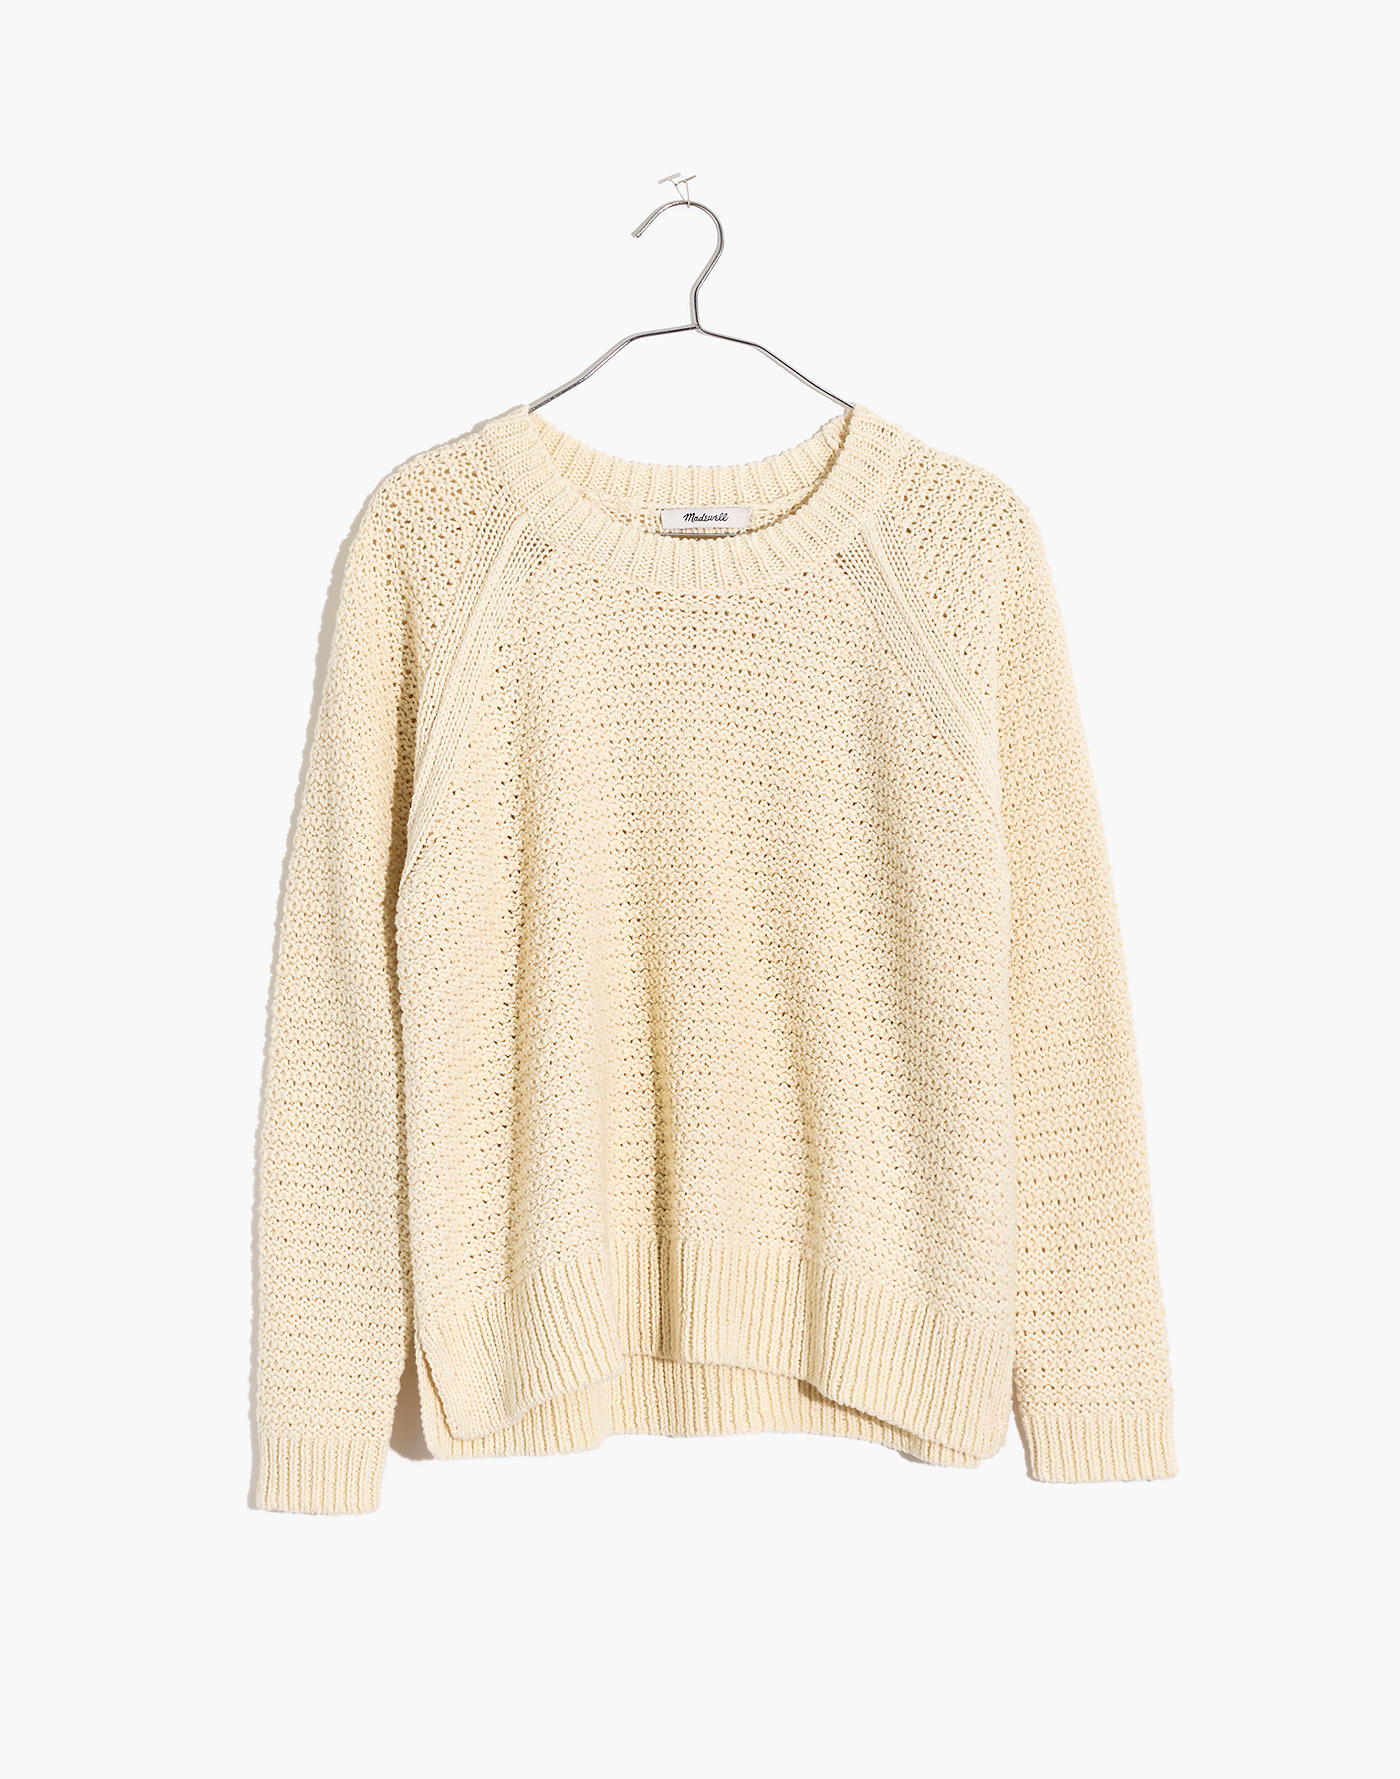 New Arrivals: Madewell J.Crew + Factory - Kelly in the City